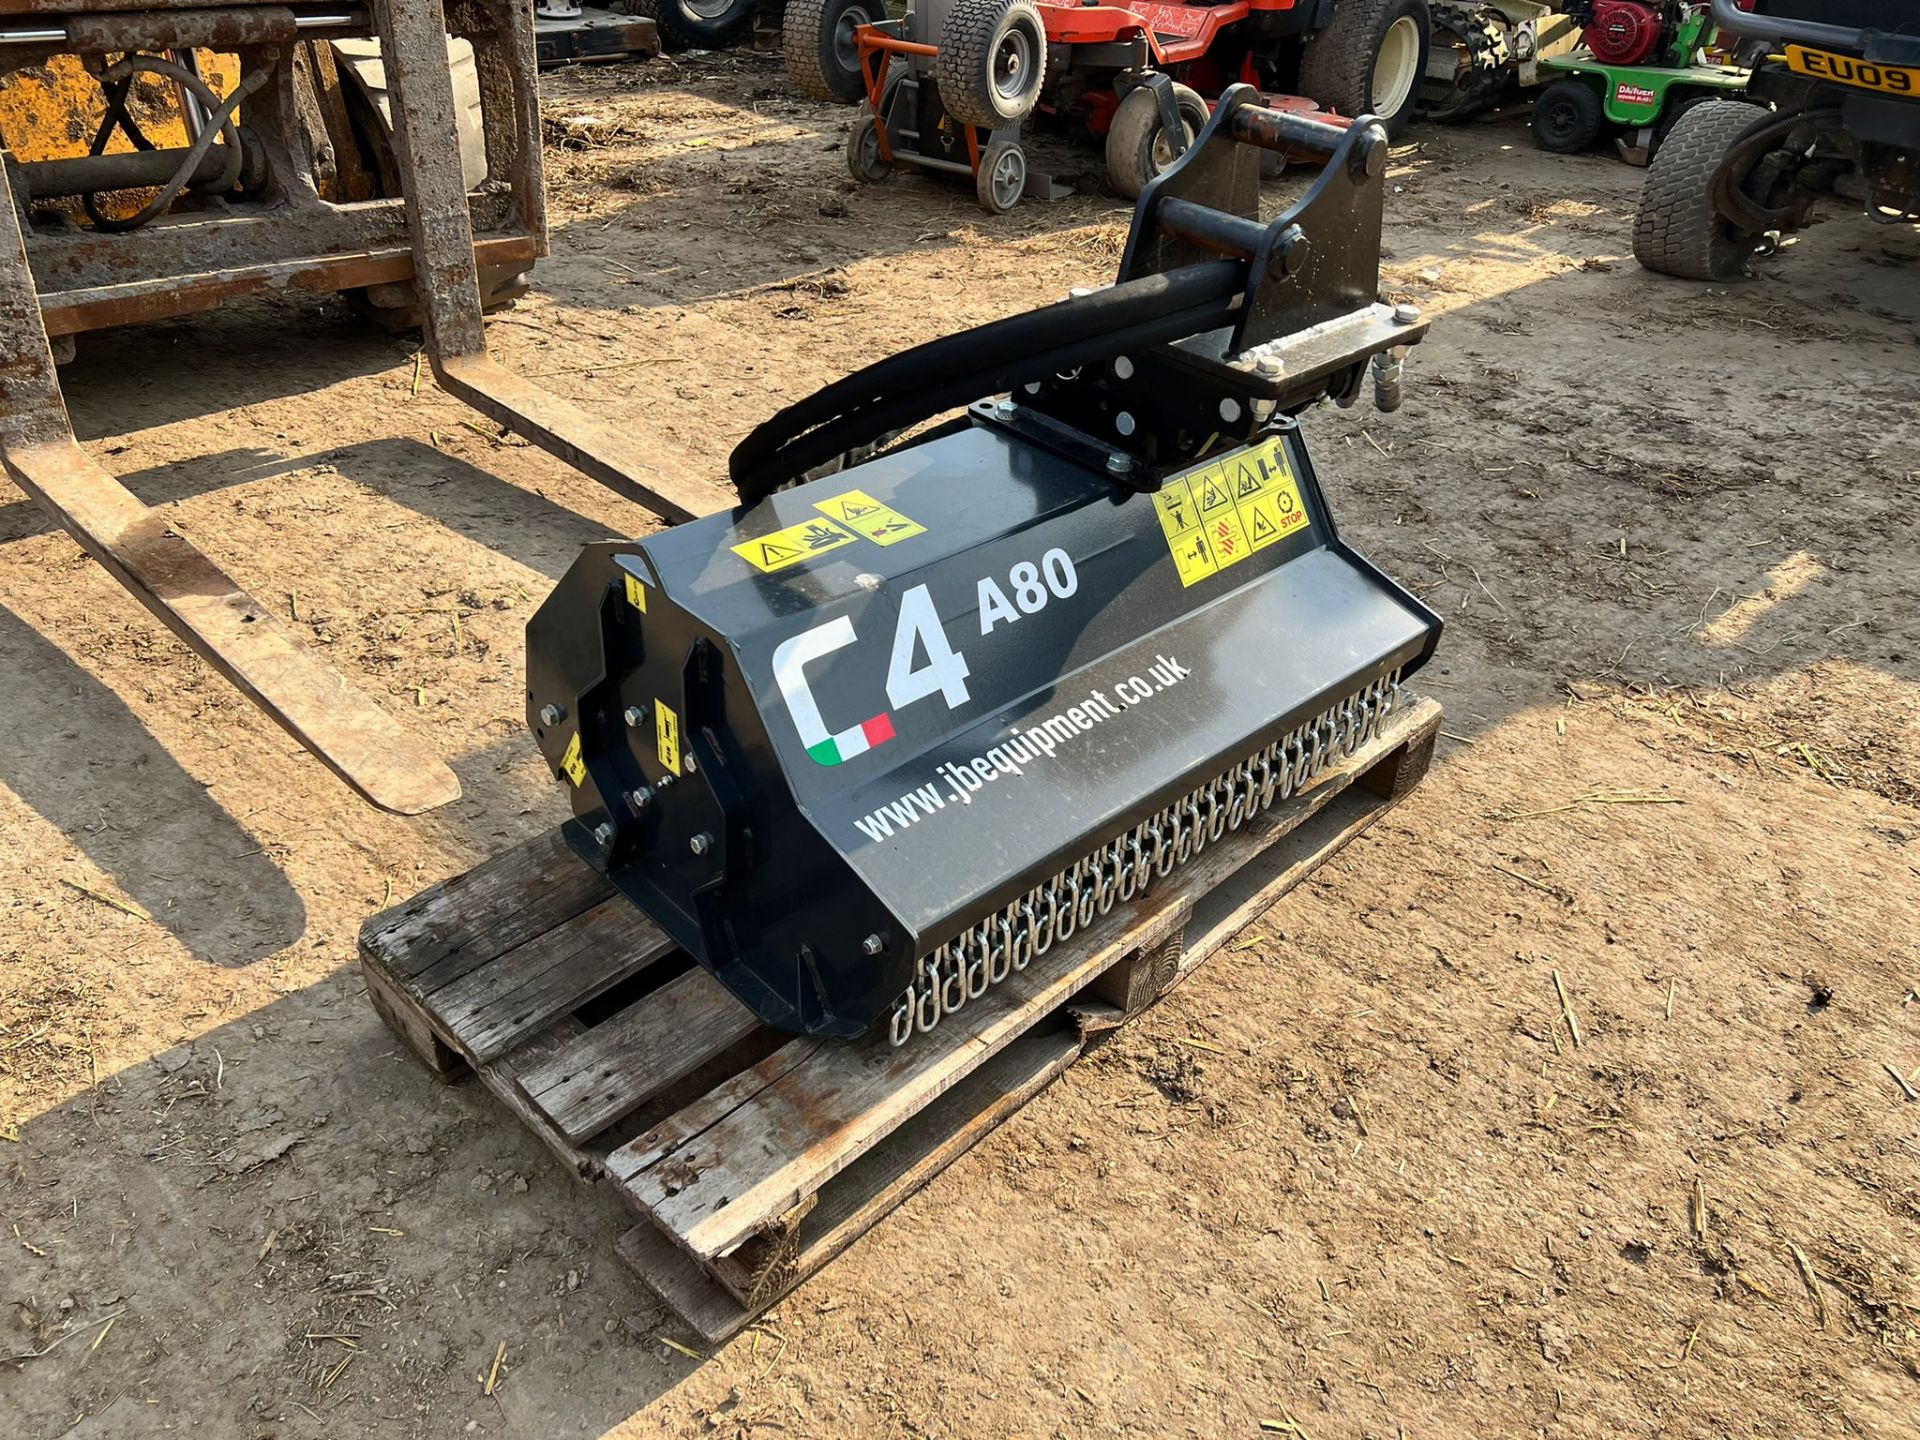 New And Unused C4 A80 Hydraulic Driven Flail Mower - Image 2 of 10